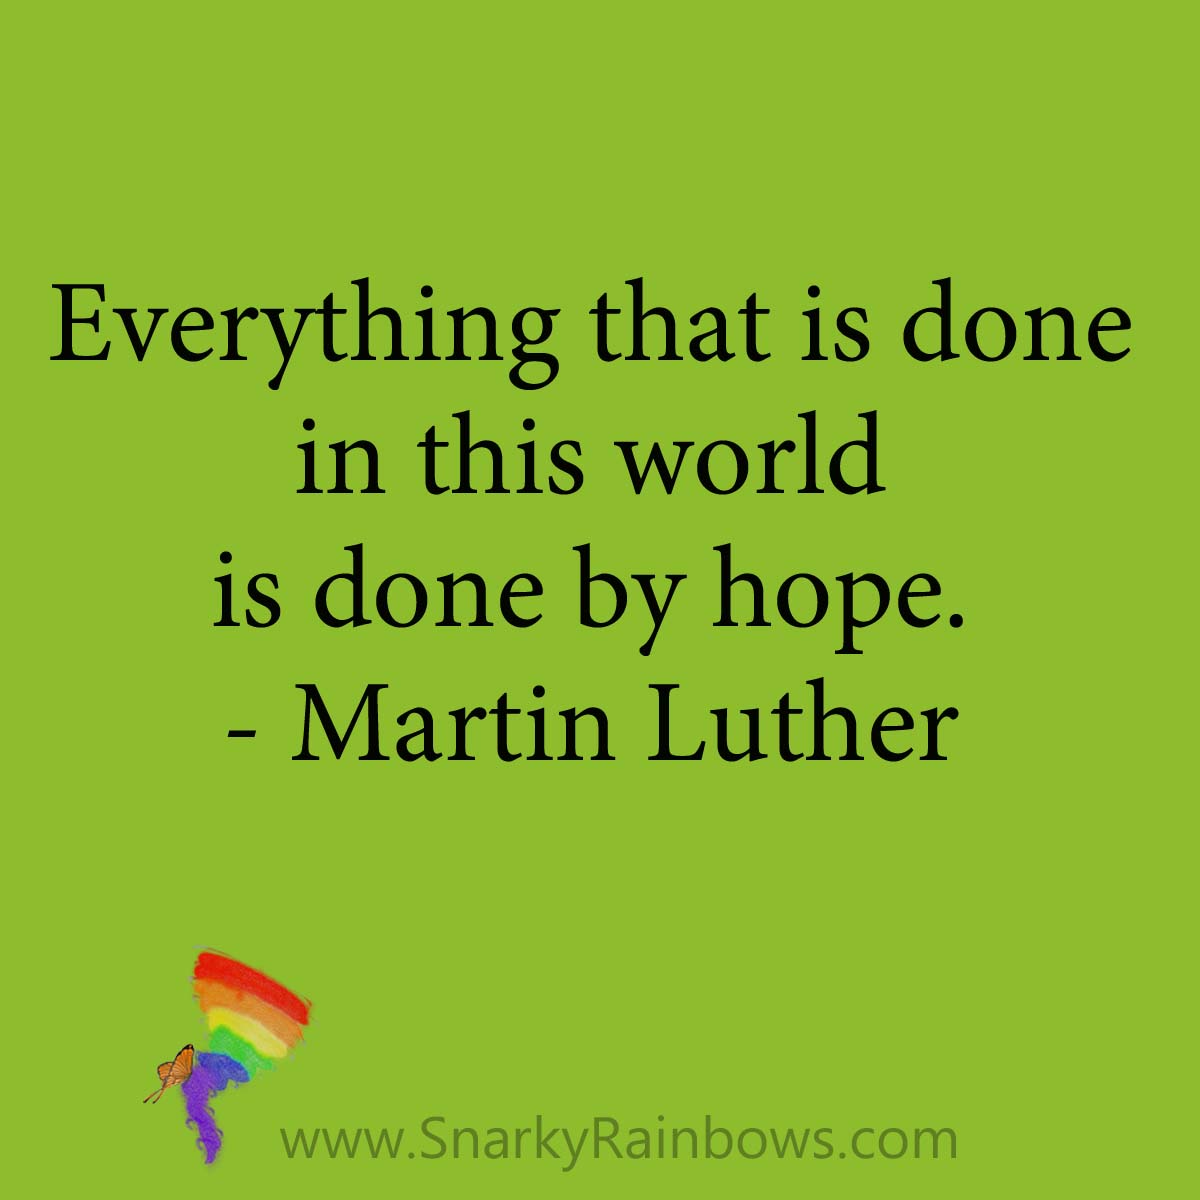 quote - martin luther - done by hope